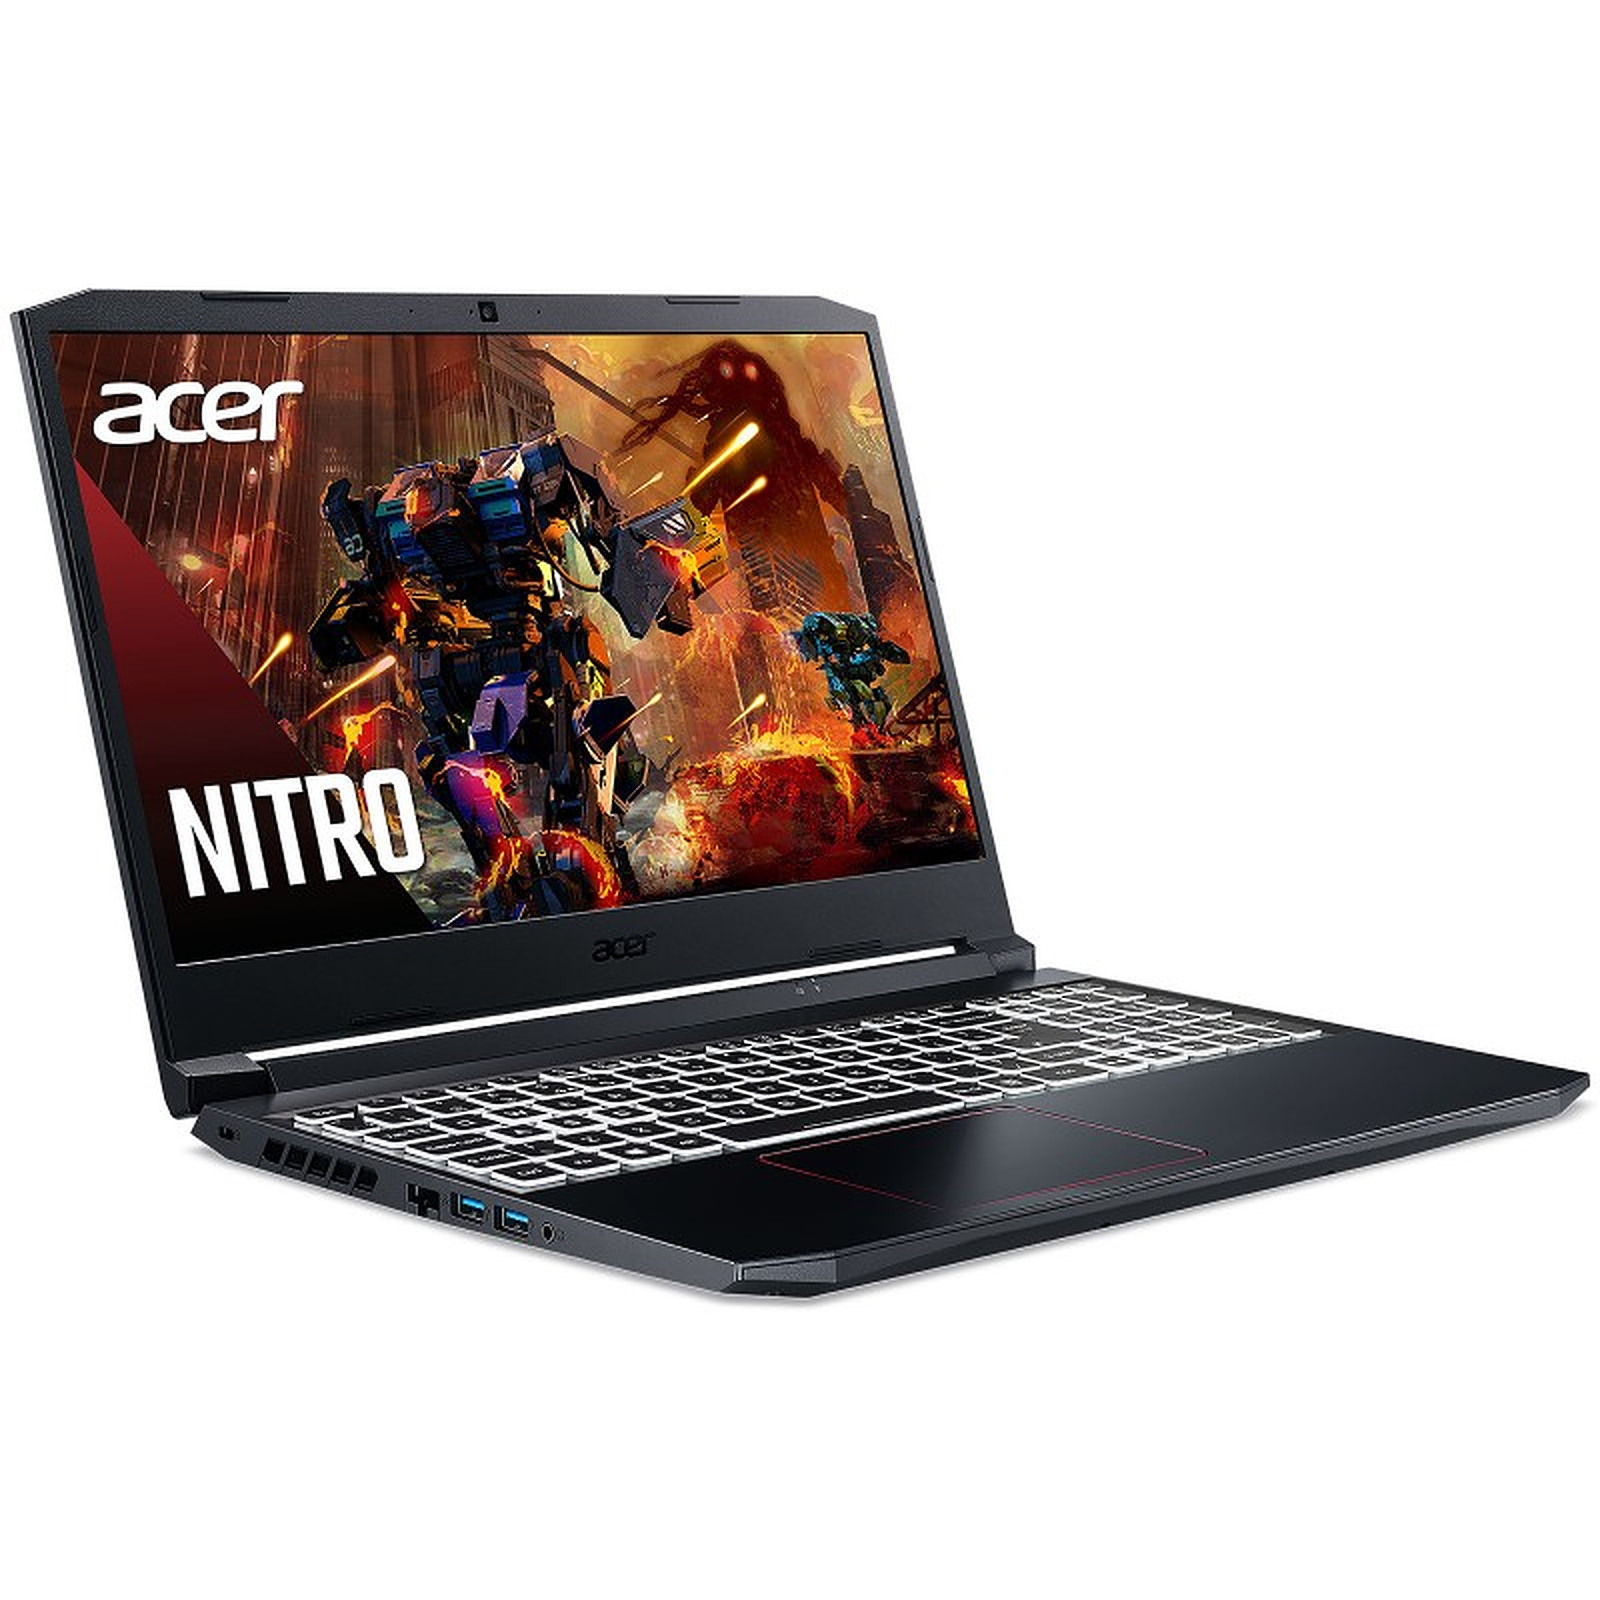 Acer Nitro 5 AN515-55-51QY (NH.QB2EF.004) · Reconditionne - PC portable reconditionne Acer